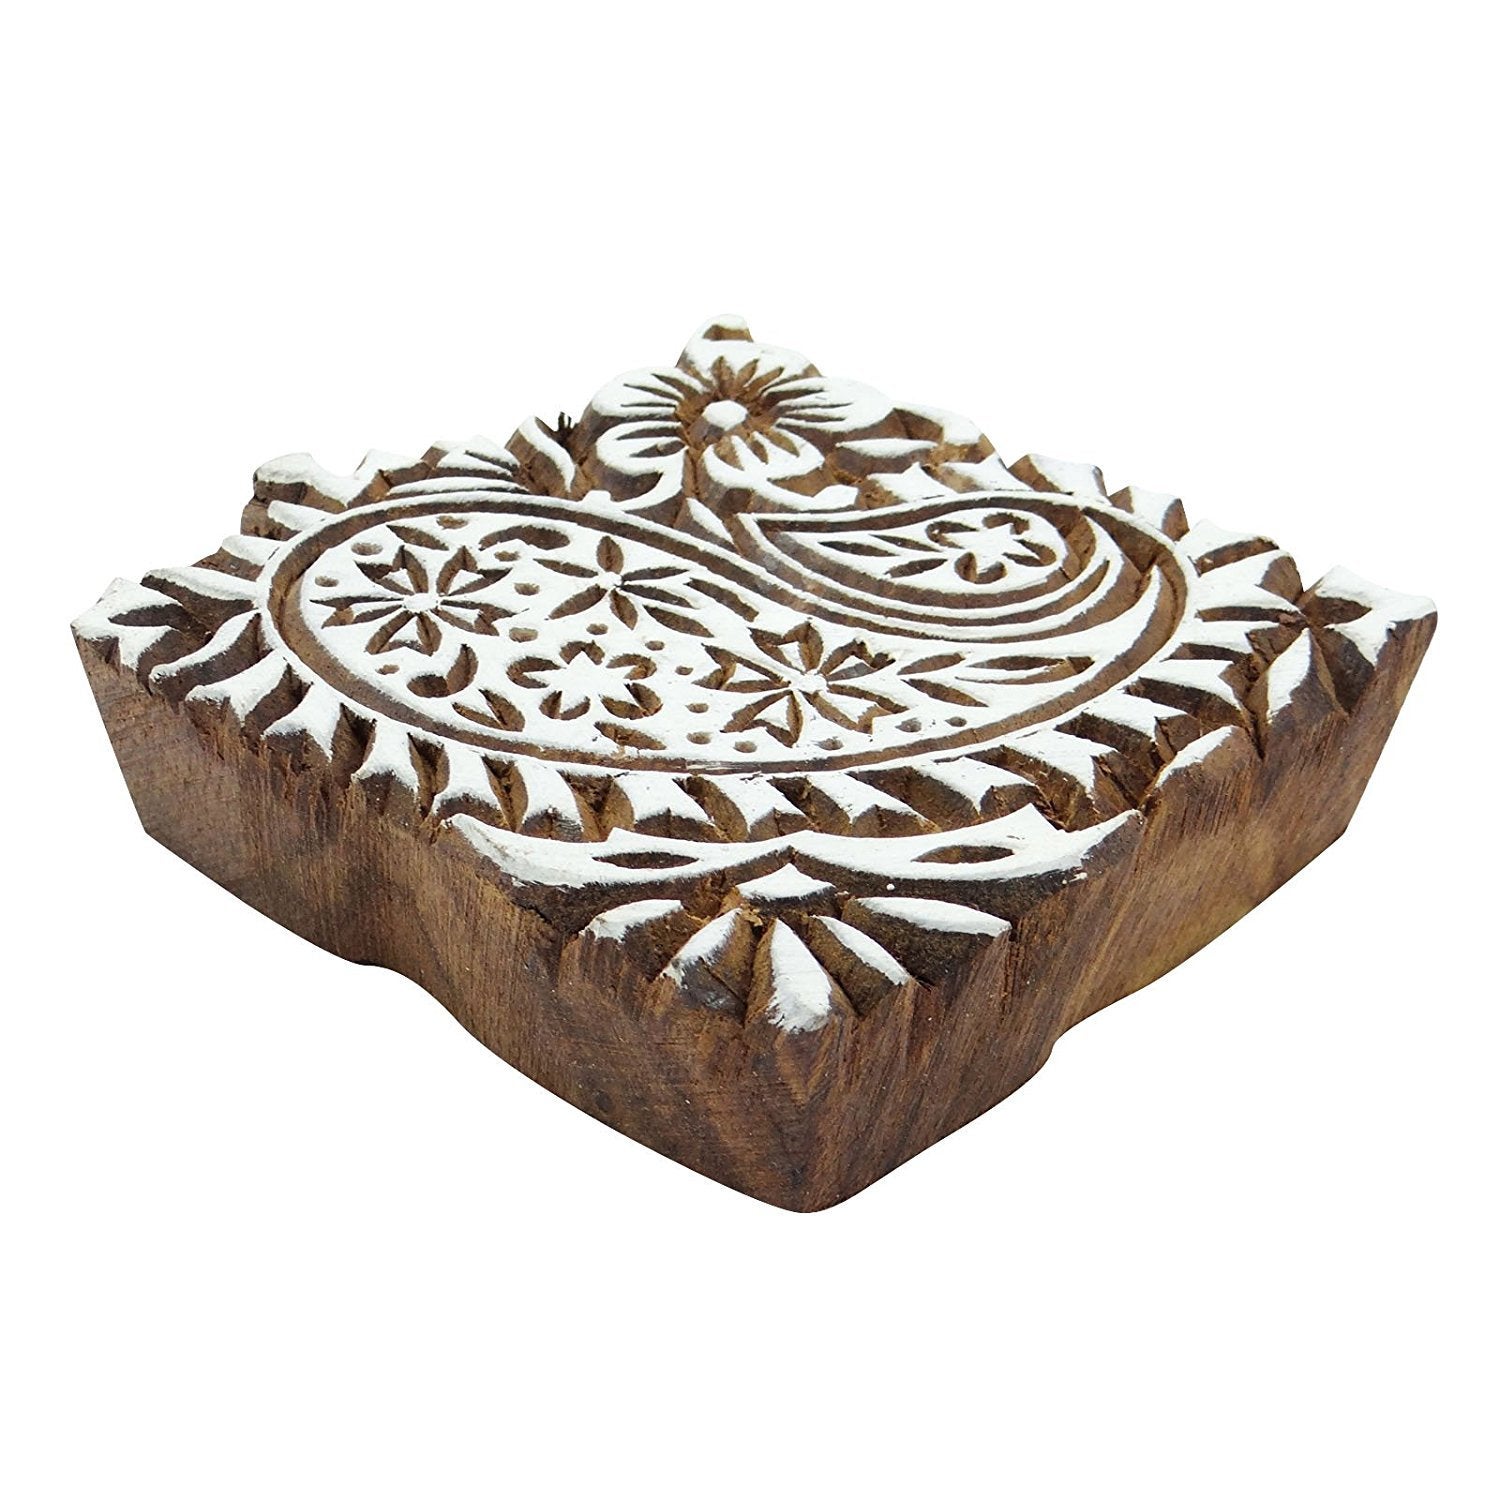 Details about   Fabric Decorative Paisley Stamp Textile Carved Wood with Brass Printing Block 